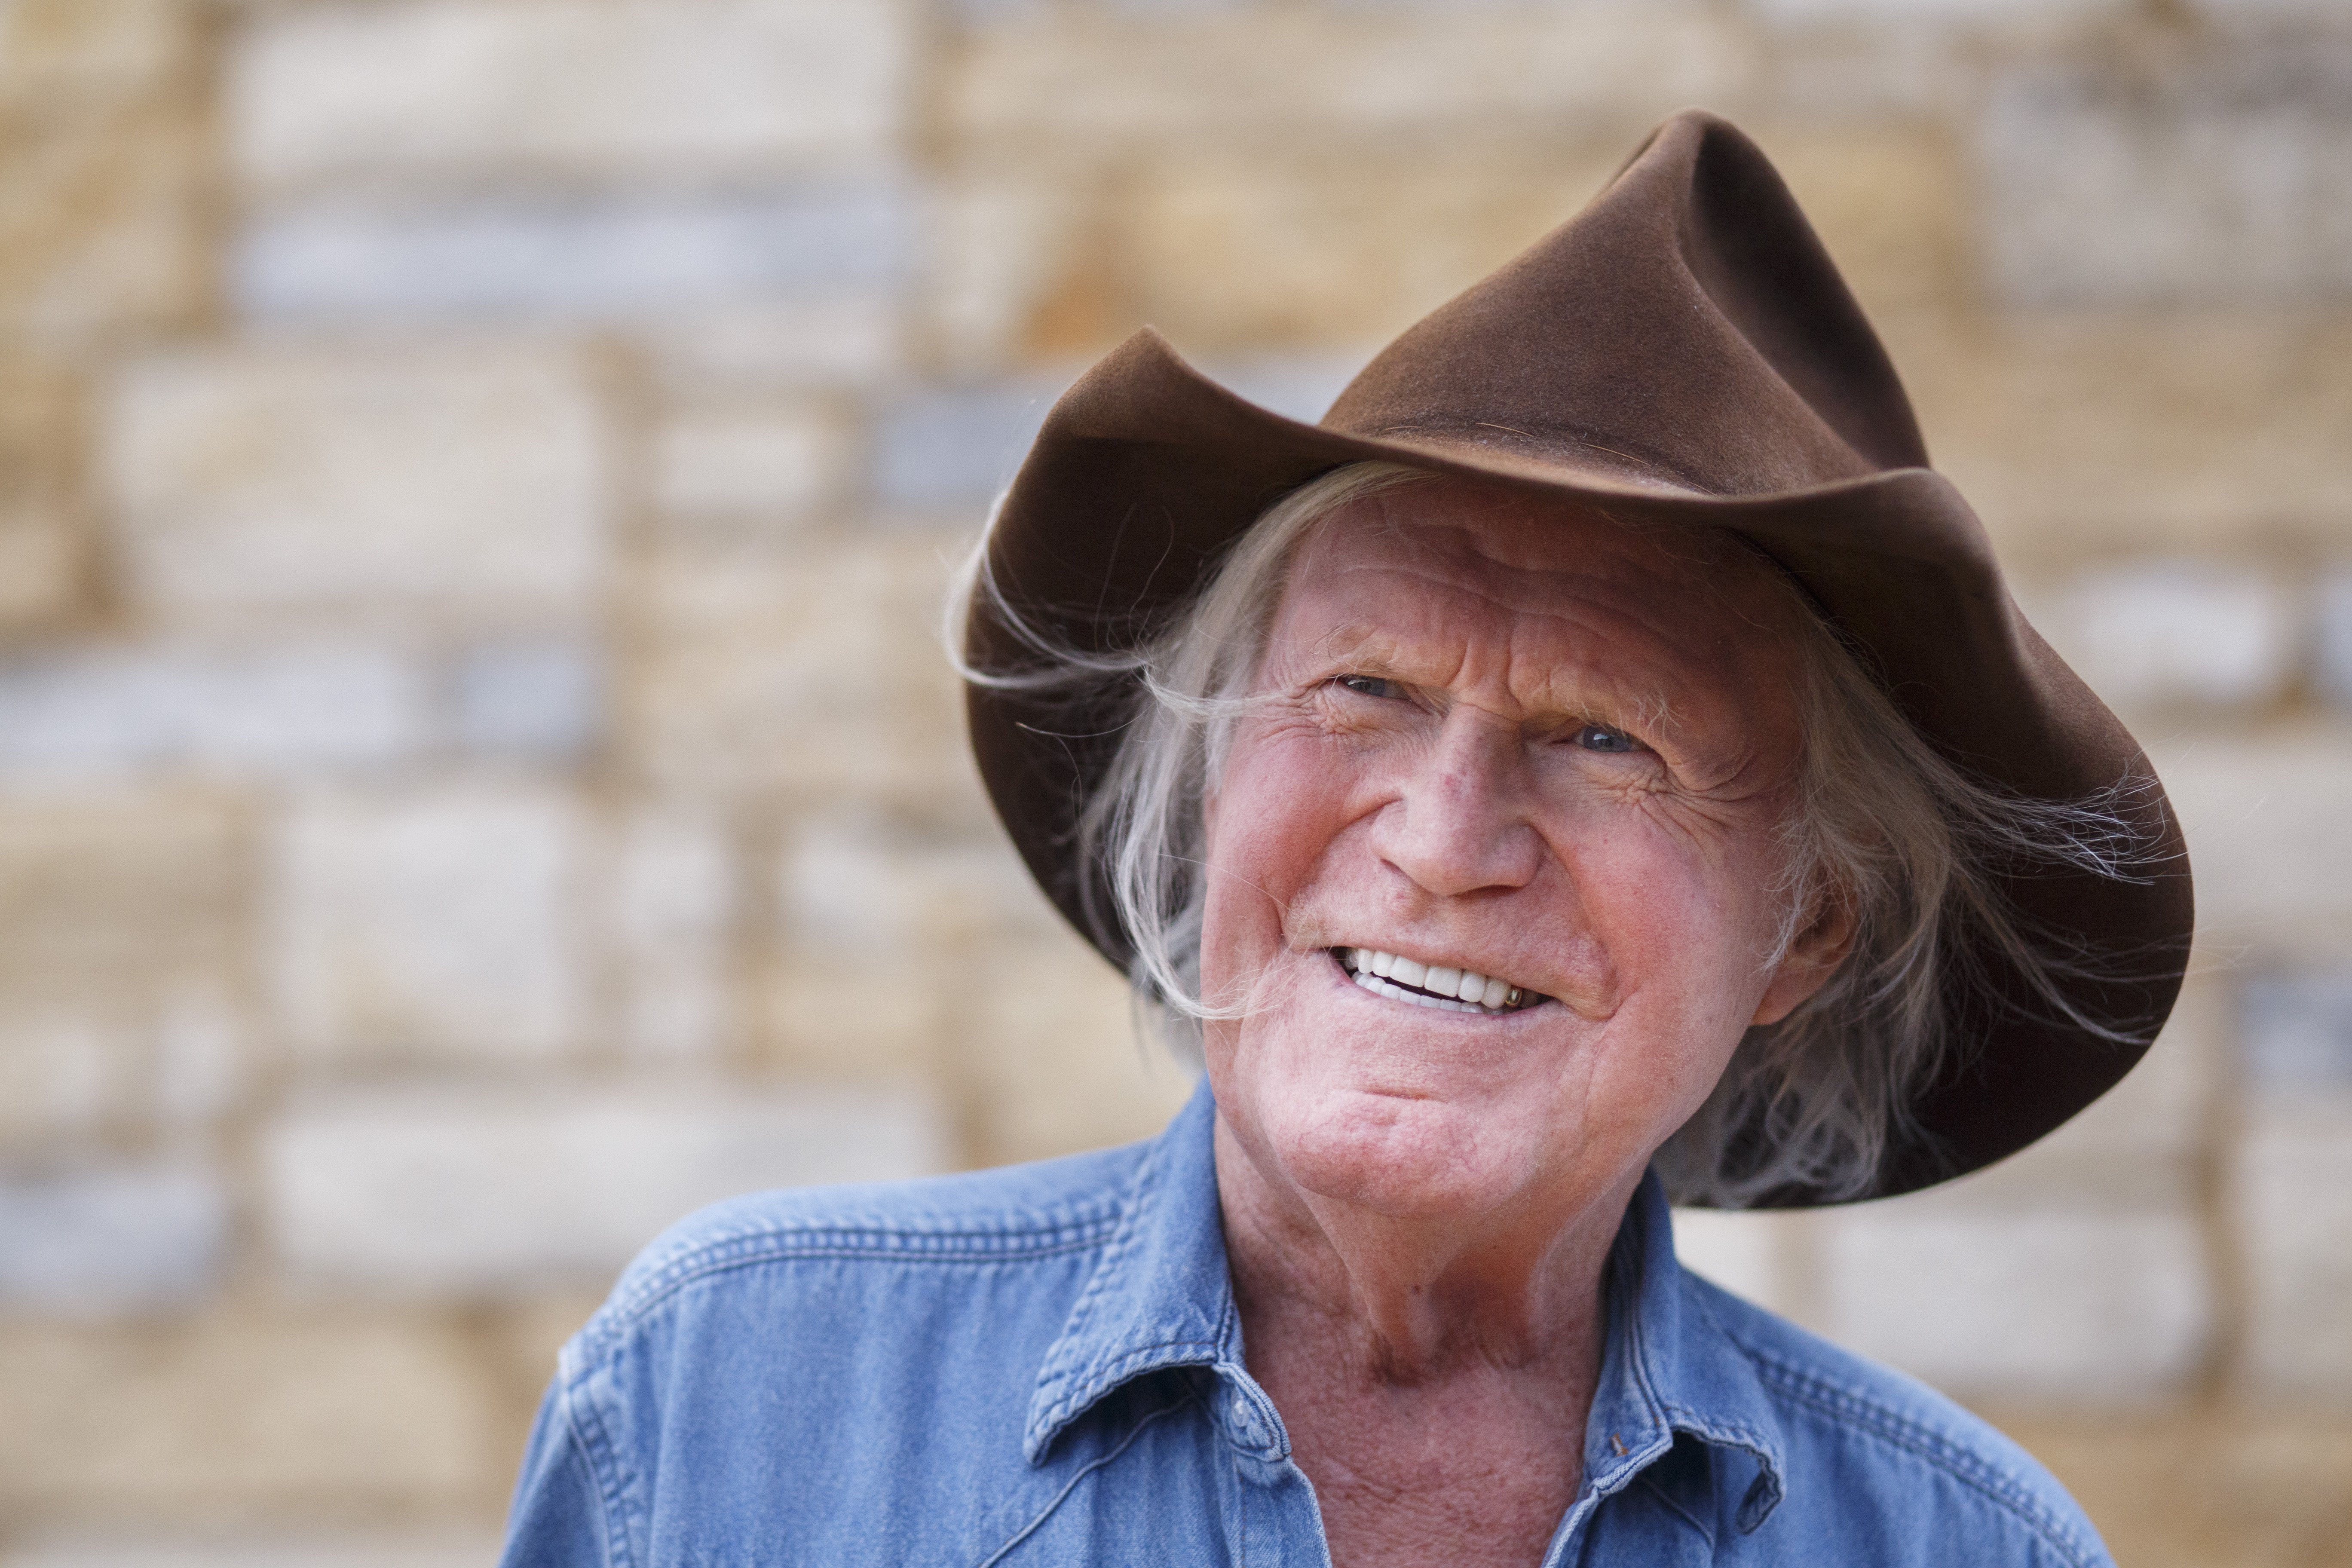  Billy Joe Shaver at the Redneck Country Club in Stafford, Texas Nov. 18, 2016. | Source: Getty Images.